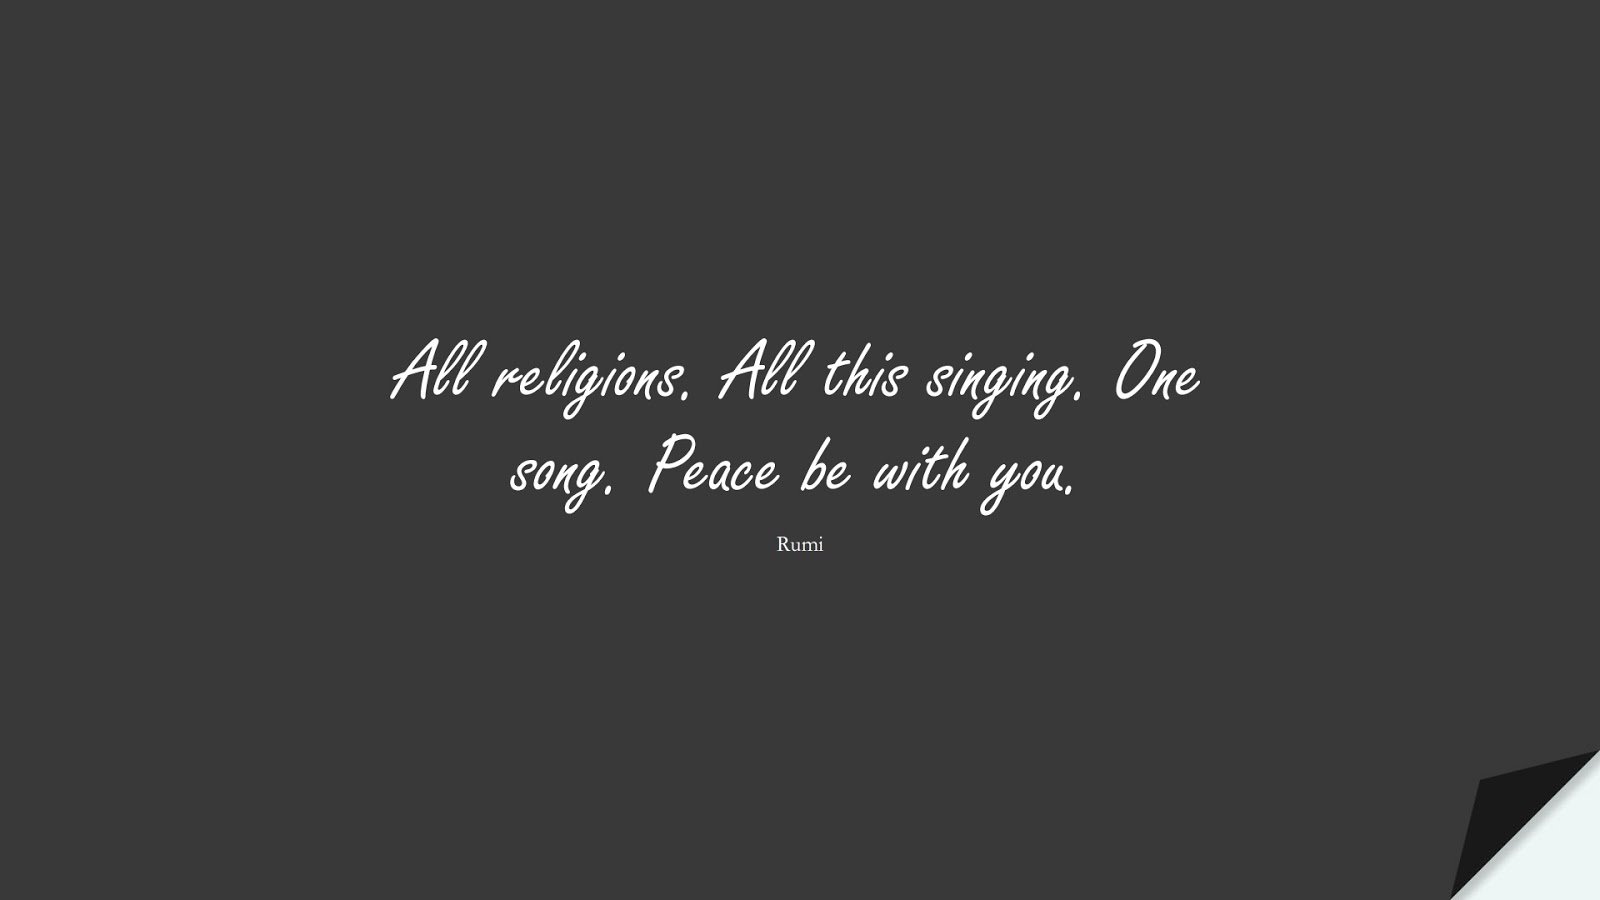 All religions. All this singing. One song. Peace be with you. (Rumi);  #RumiQuotes